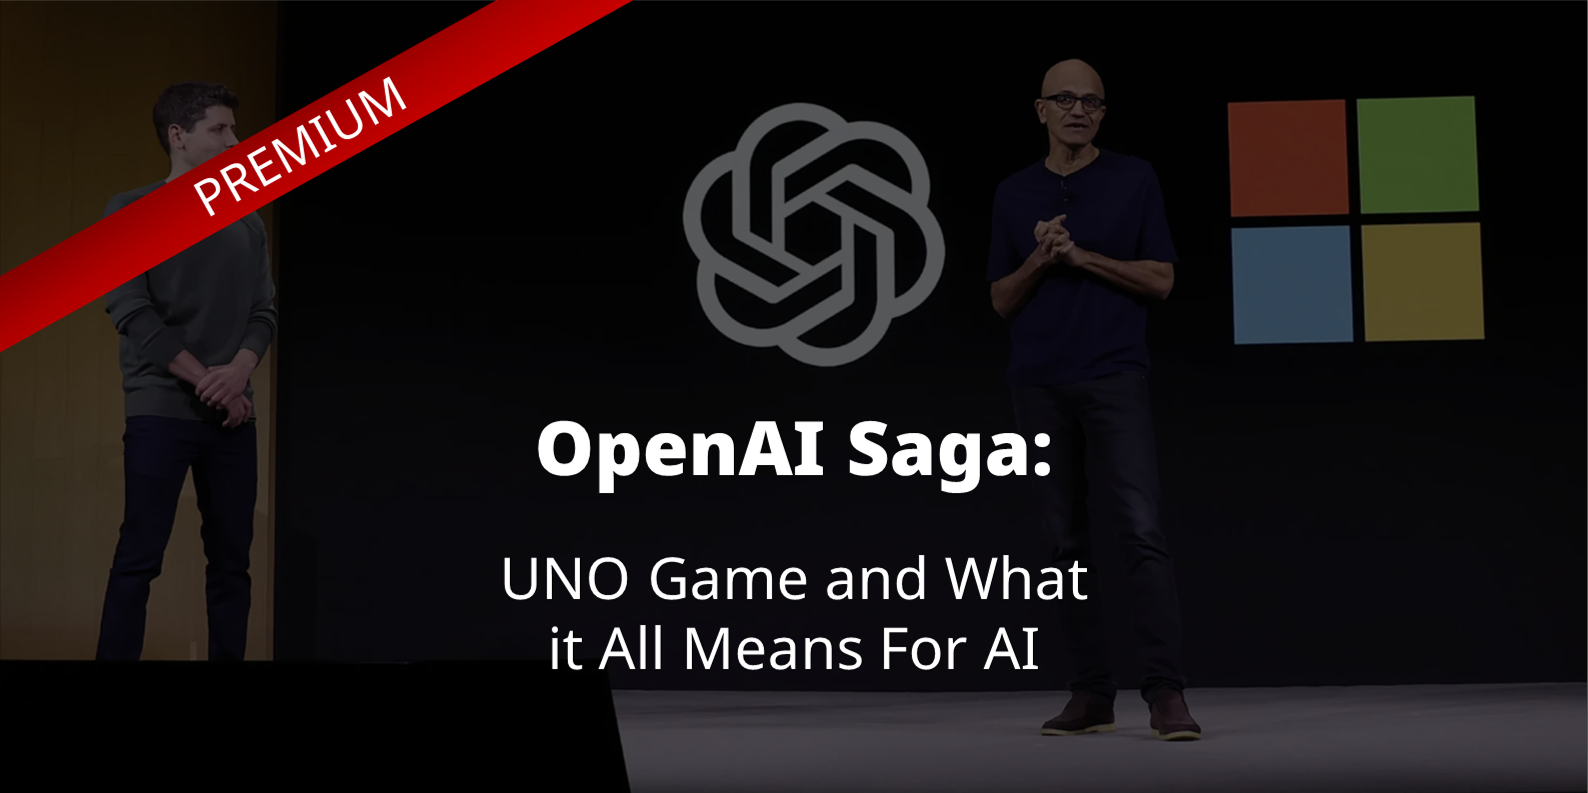 OpenAI Saga: UNO Game and What it All Means For AI